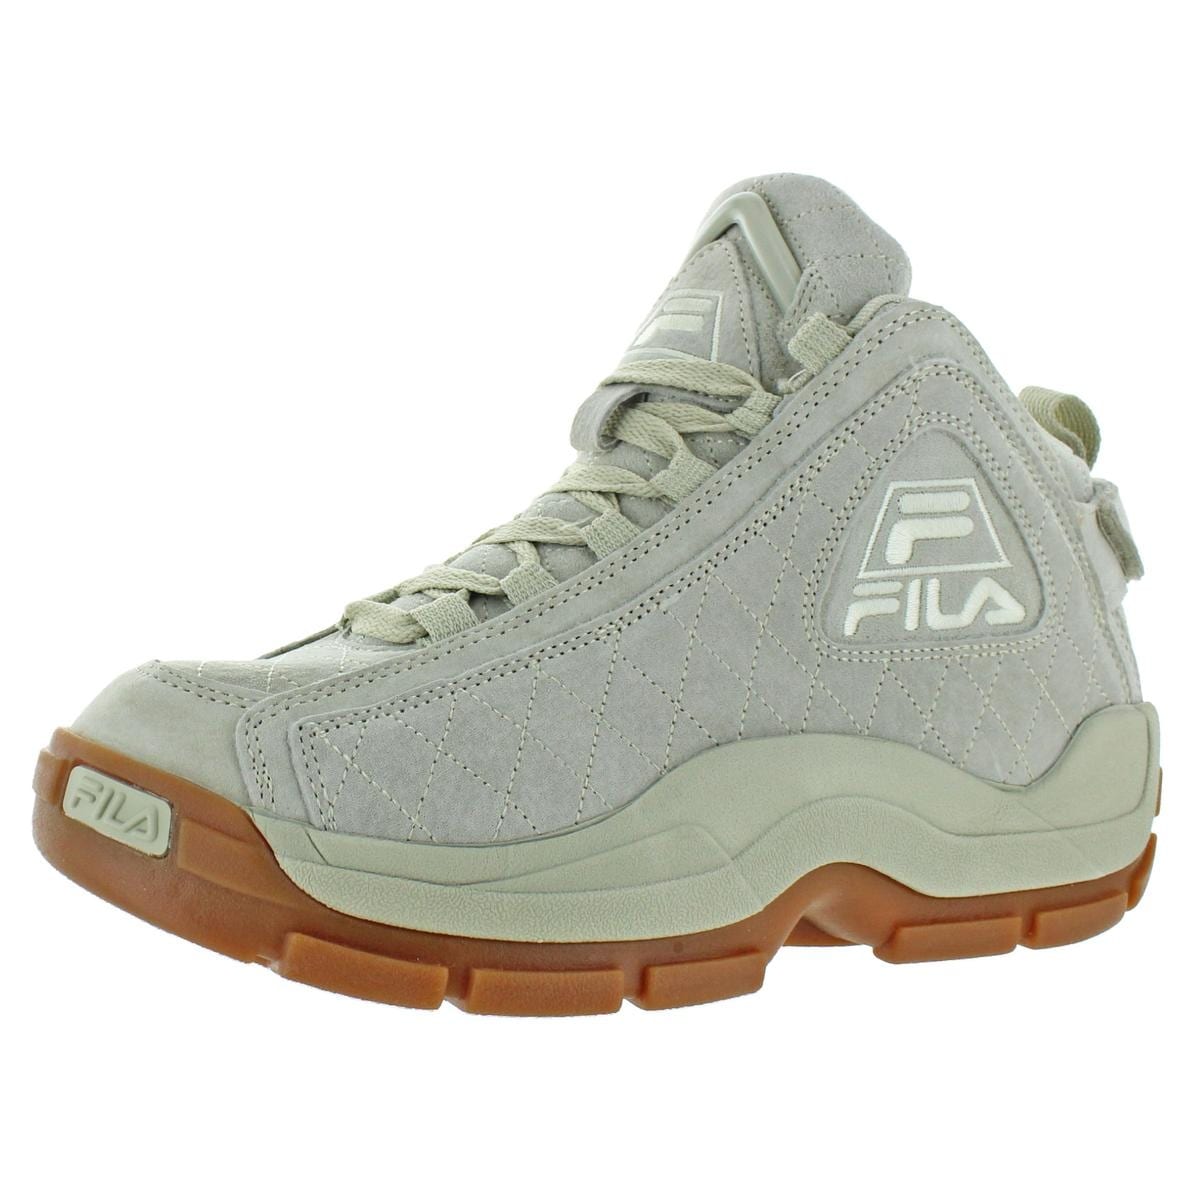 fila men's 96 quilted